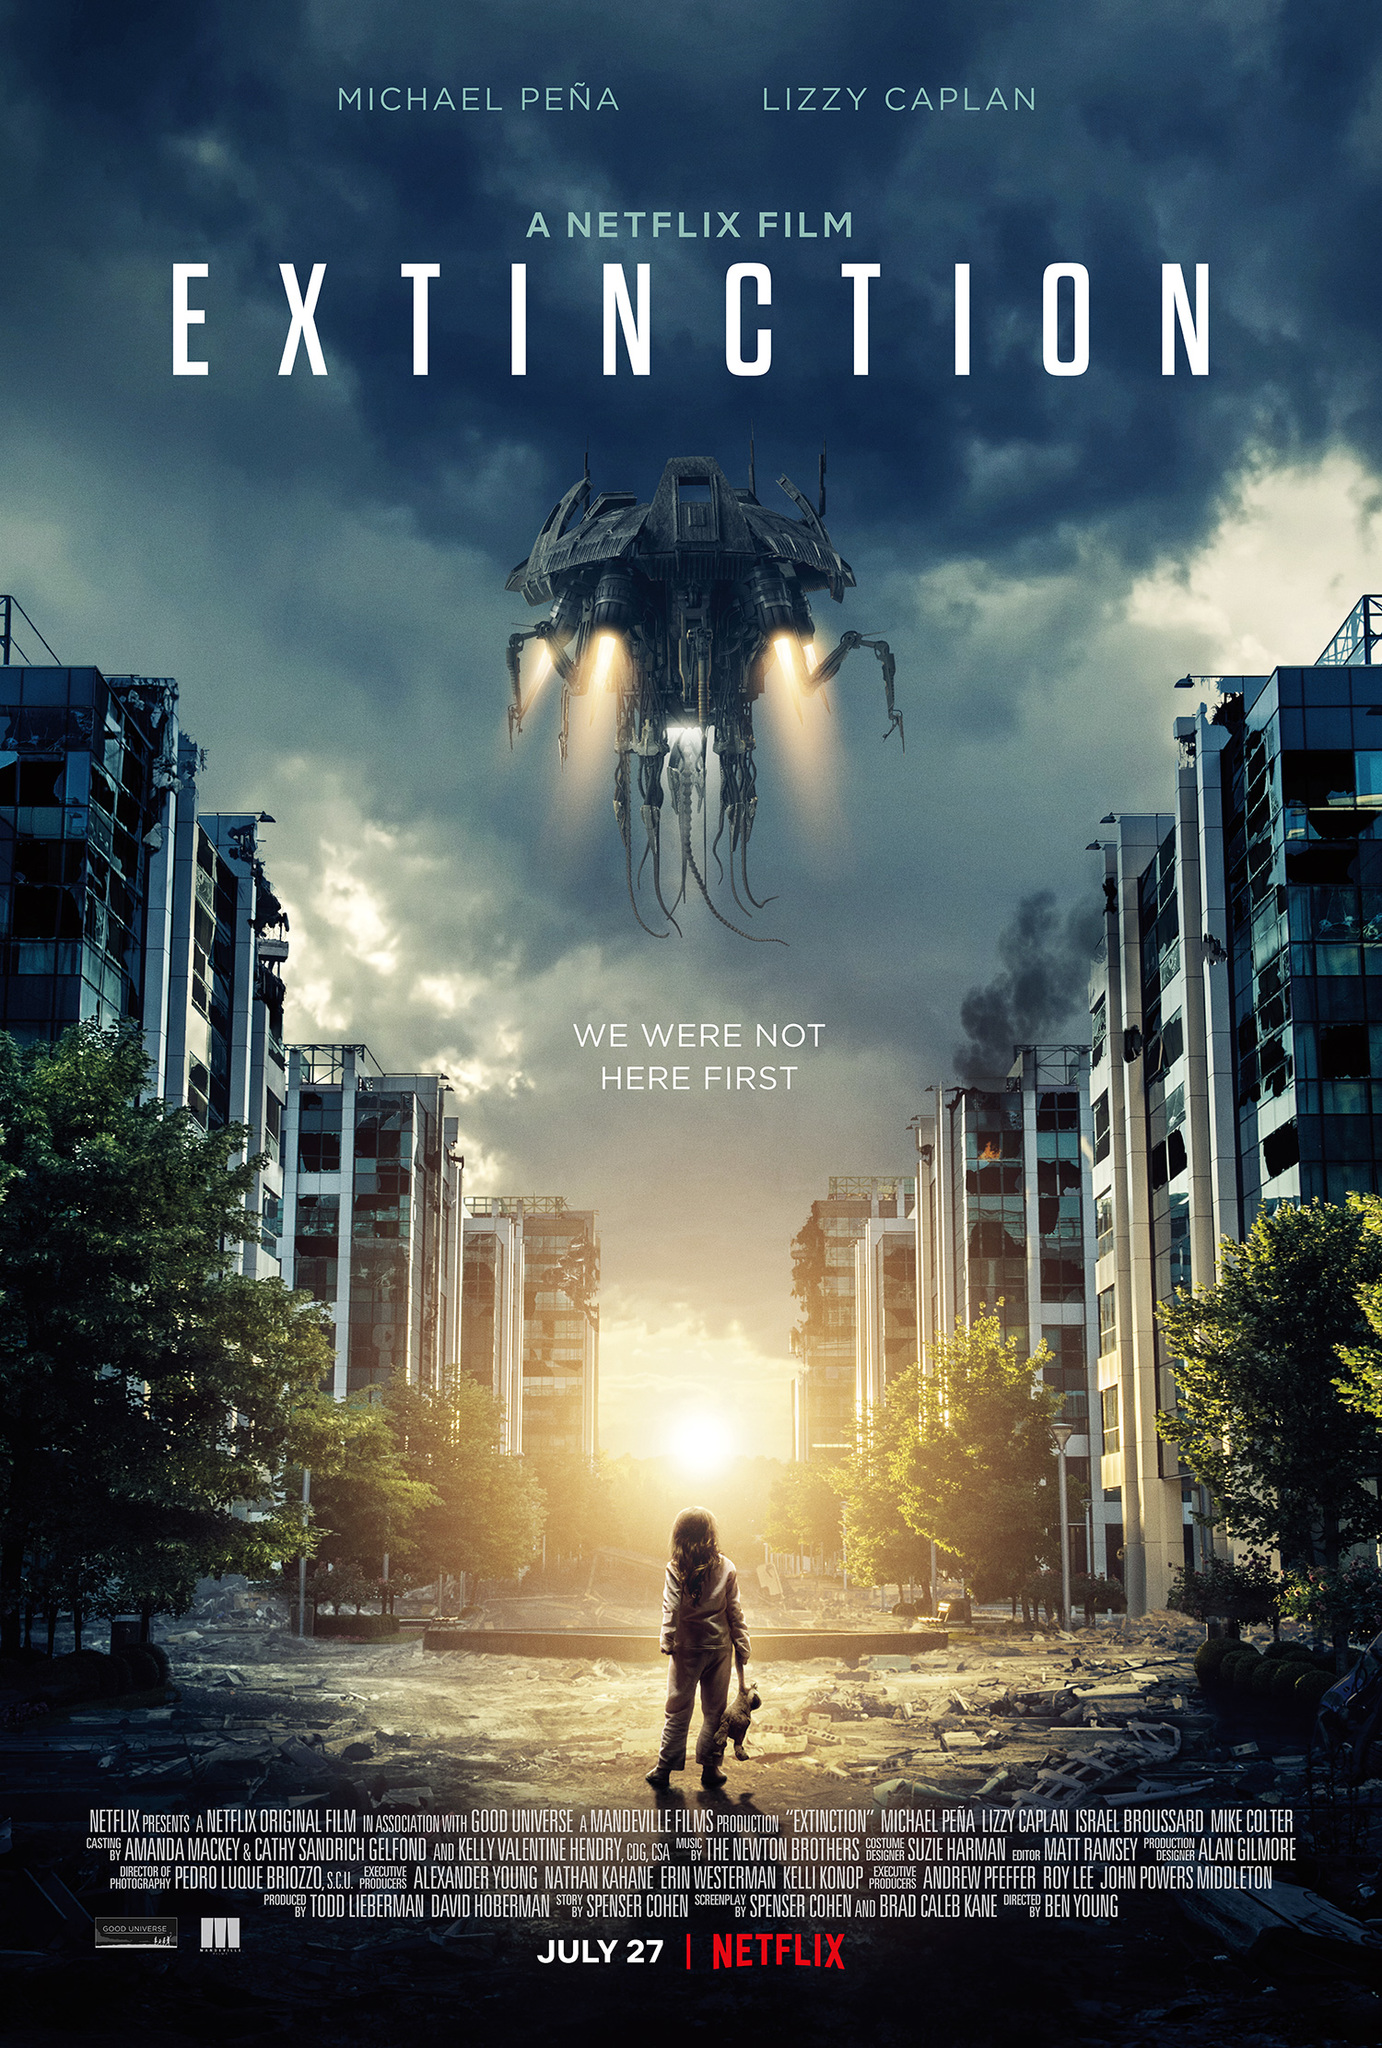 A man's home life starts to suffer when he has recurring nightmares about a destructive and unknown force. He must soon find the strength to save his wife and two daughters when extraterrestrials launch a devastating attack on the planet.